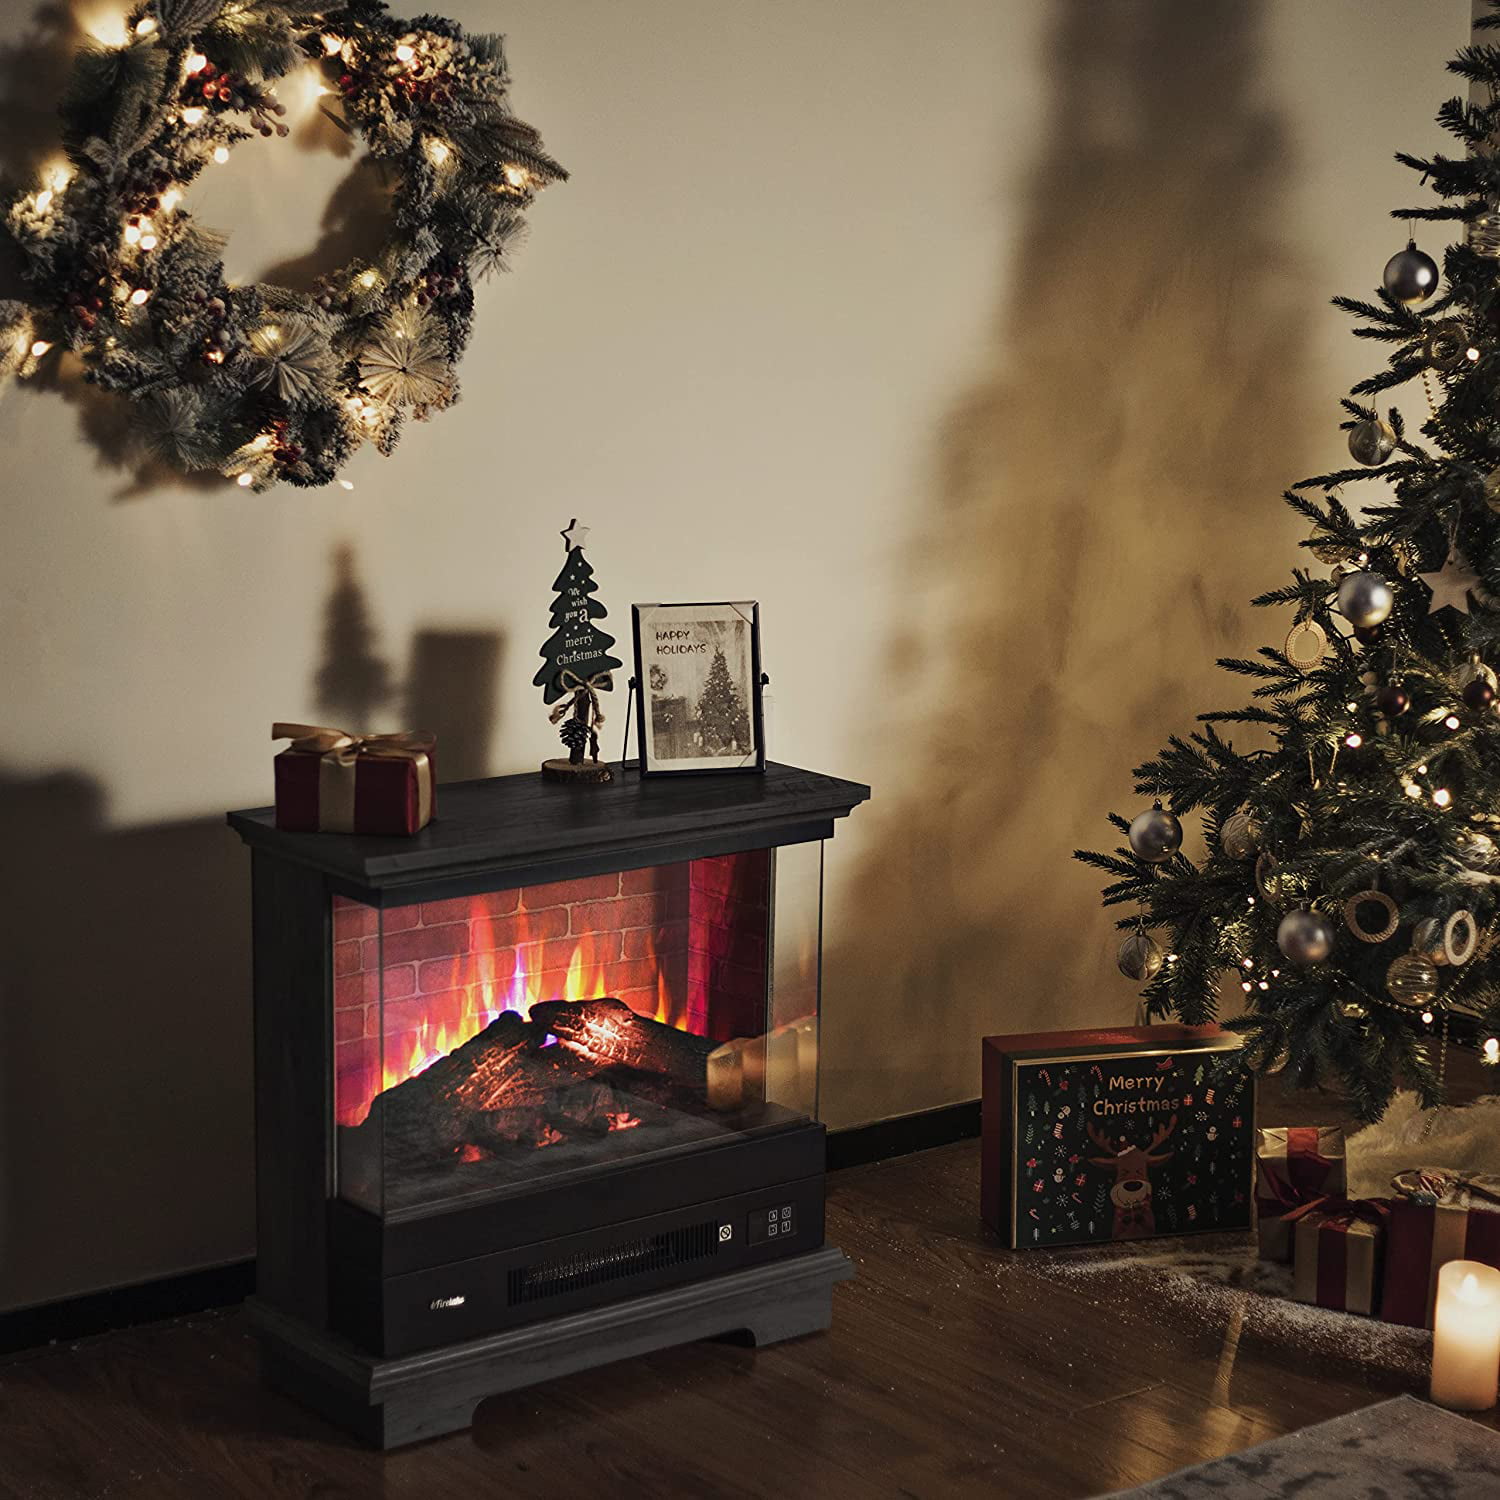 TURBRO Firelake 27-Inch Electric Fireplace Heater - Freestanding Fireplace  with Mantel, No Assembly Required - 7 Adjustable Flame Effects, Overheating  Protection, CSA Certified - 1400W, Black Walnut - Walmart.com